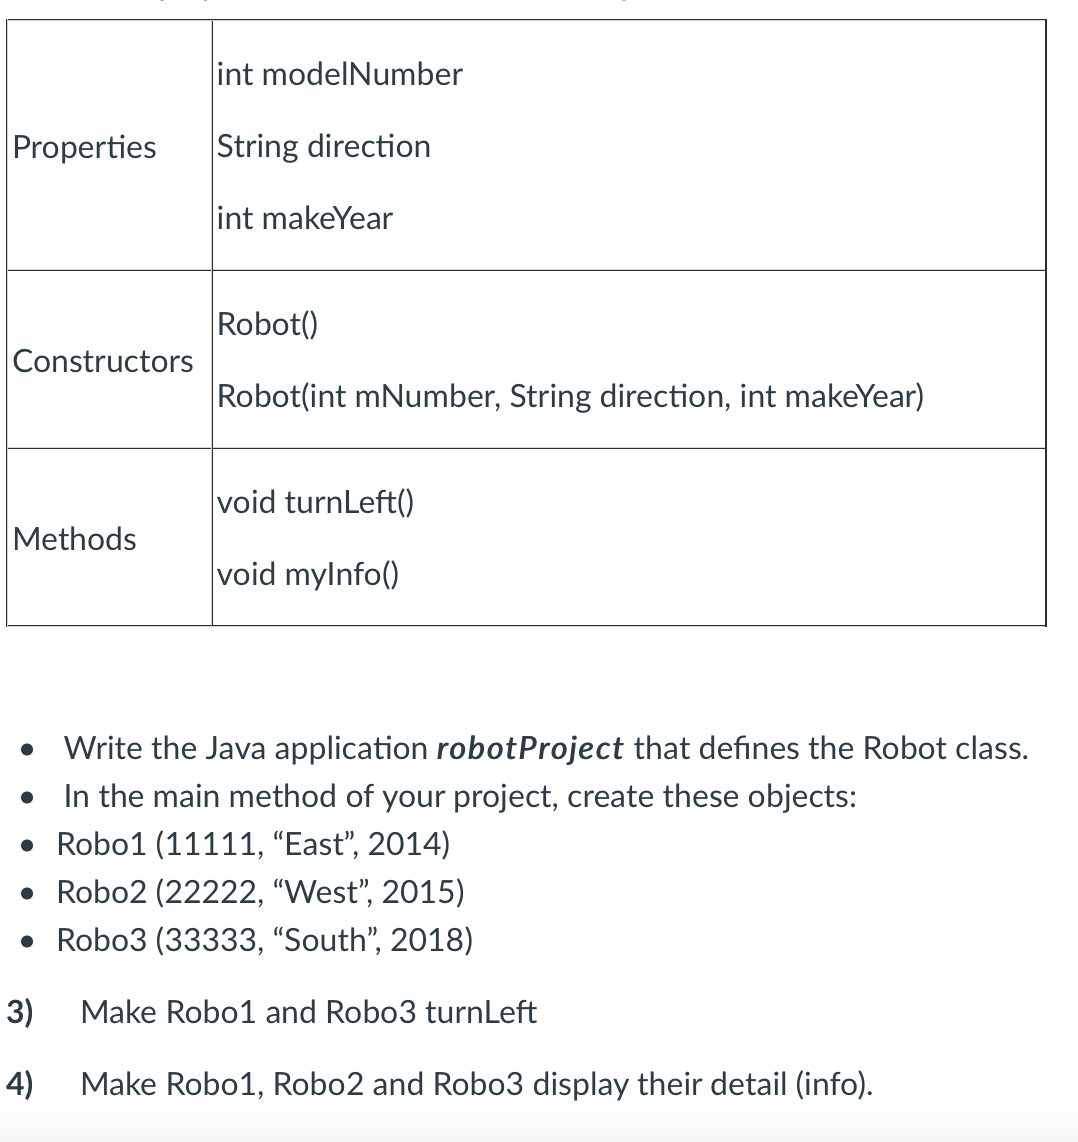 int modelNumber
Properties
String direction
int makeYear
Robot()
Constructors
Robot(int mNumber, String direction, int makeYear)
void turnLeft()
Methods
void mylnfo()
Write the Java application robotProject that defines the Robot class.
In the main method of your project, create these objects:
• Robo1 (11111, "East", 2014)
• Robo2 (22222, "West", 2015)
• Robo3 (33333, "South", 2018)
3)
Make Robo1 and Robo3 turnLeft
4)
Make Robo1, Robo2 and Robo3 display their detail (info).
